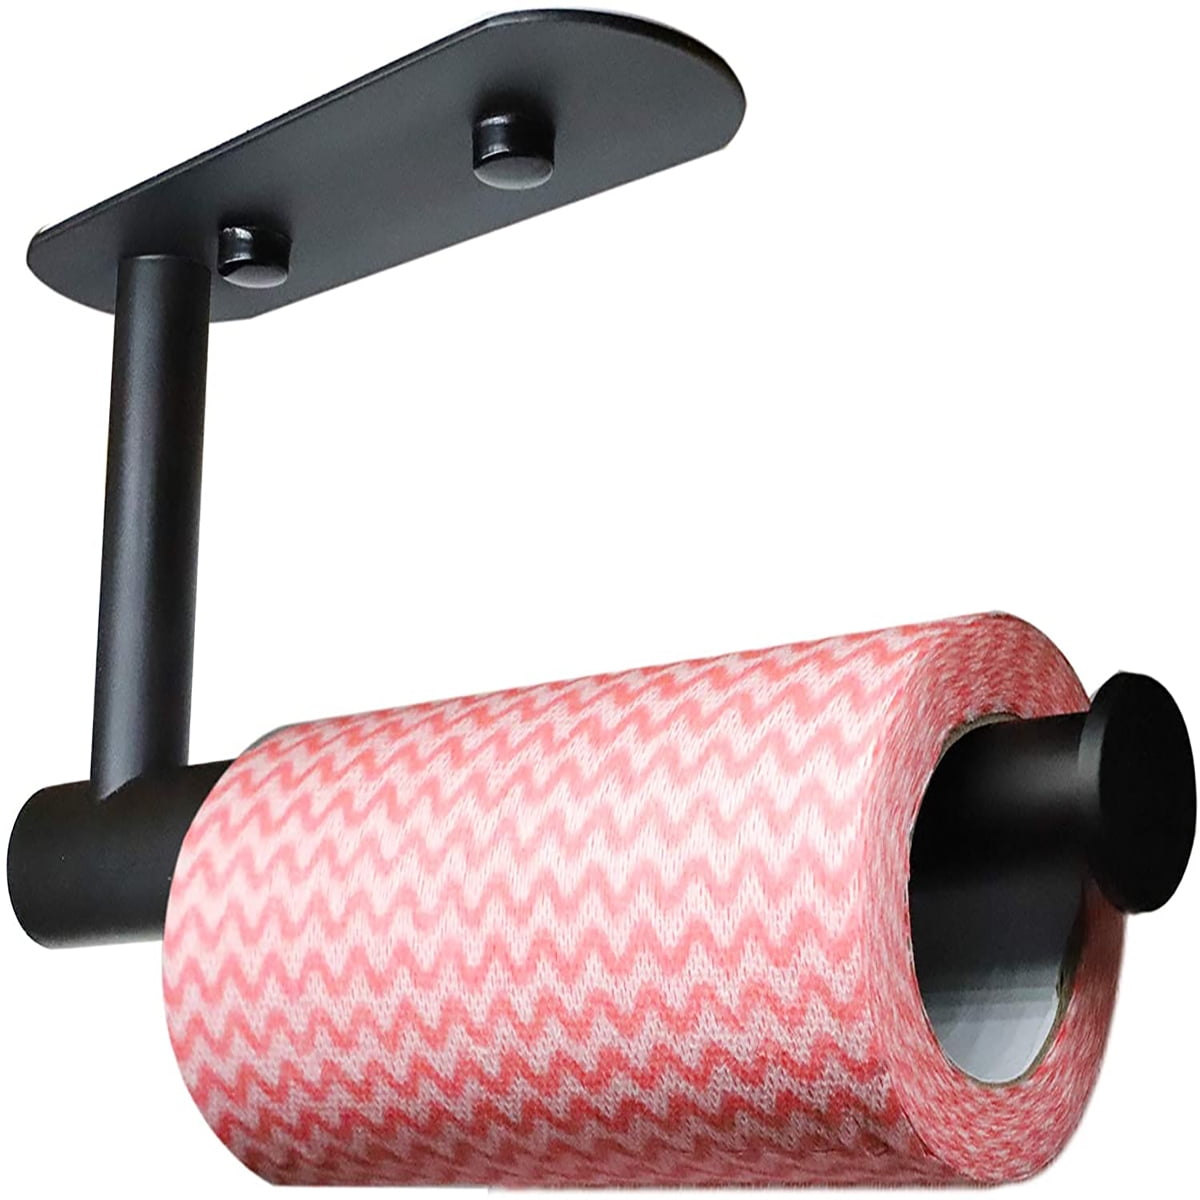 Paper Towel Holder Under Cabinet Wall Mount, Adhesive Paper towel roll